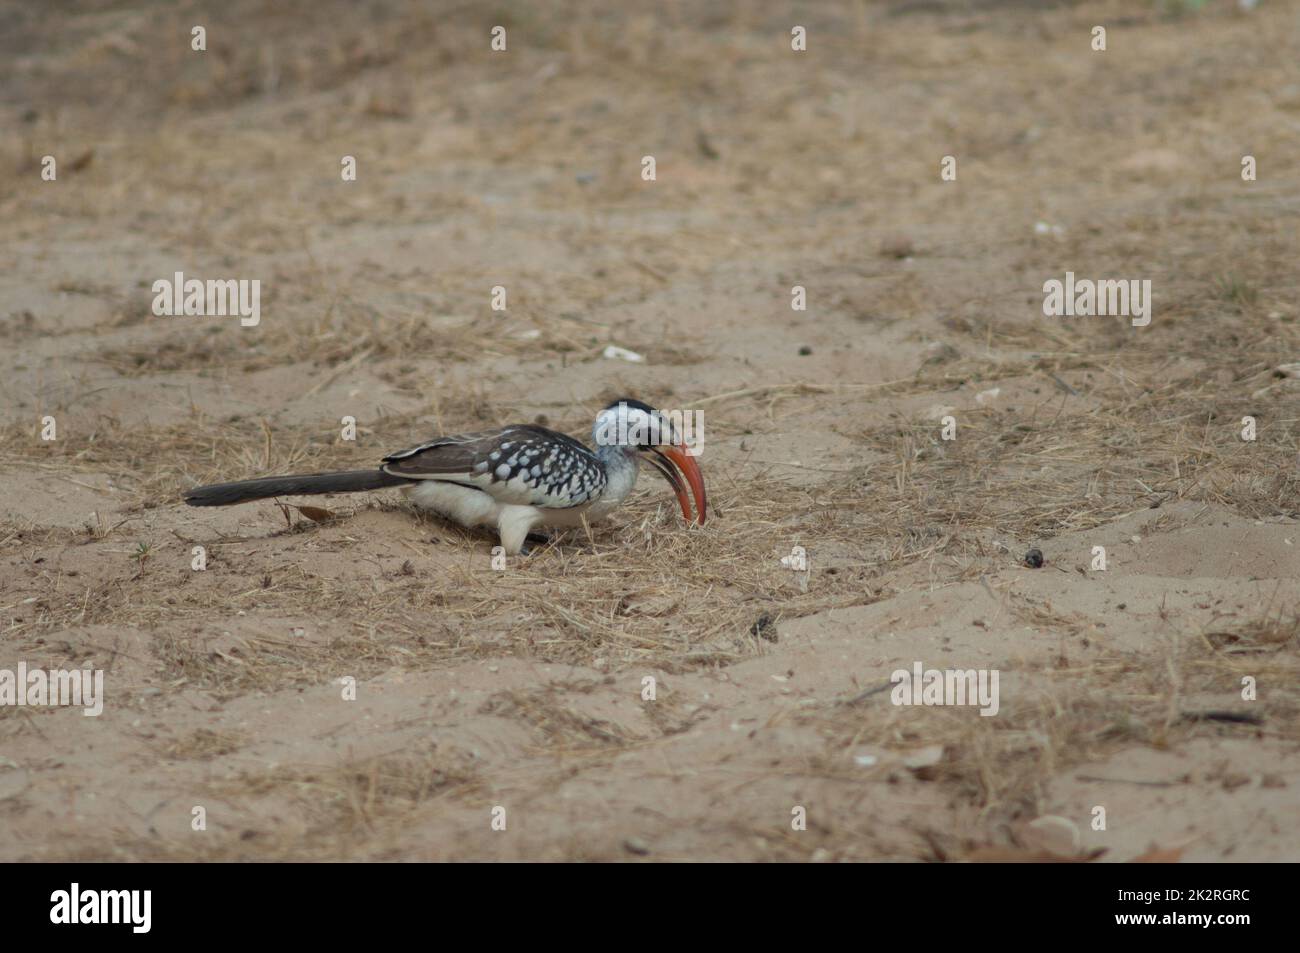 Northern red-billed hornbill Tockus erythrorhynchus kempi searching for food. Stock Photo